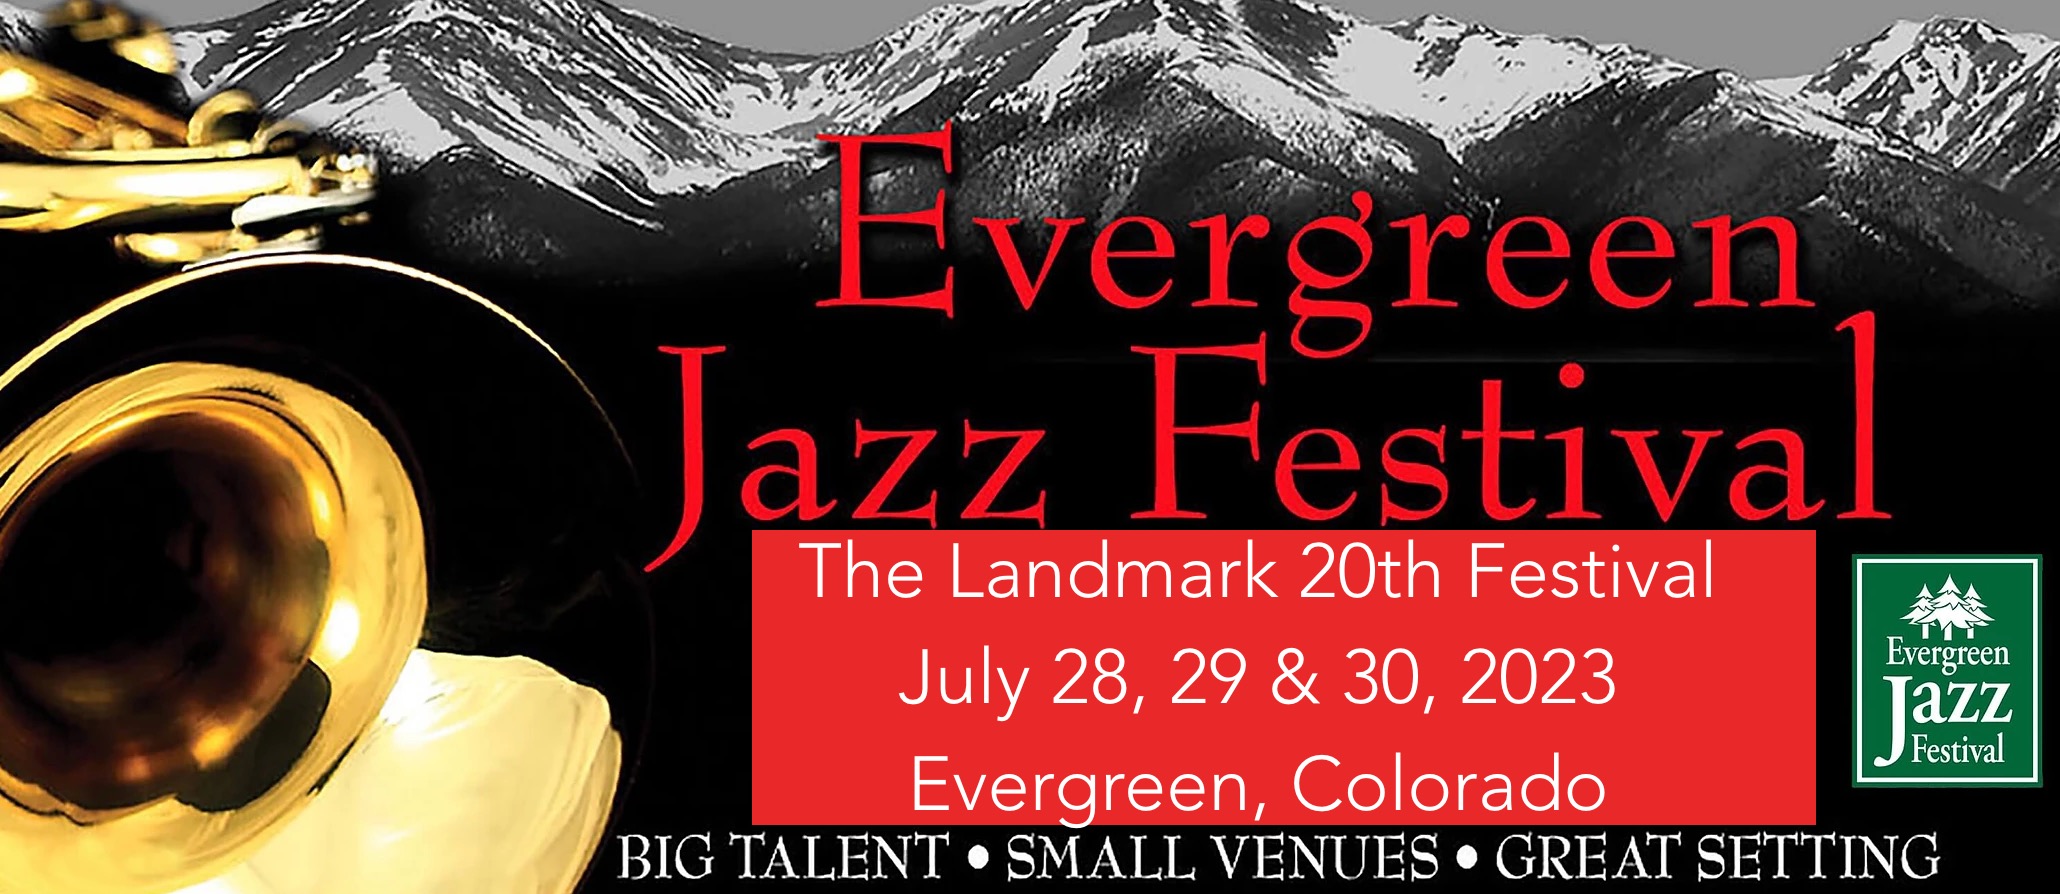 Promotional image with mountains in the background and a horn for the Evergreen Jazz Festival in Evergreen, Colorado.